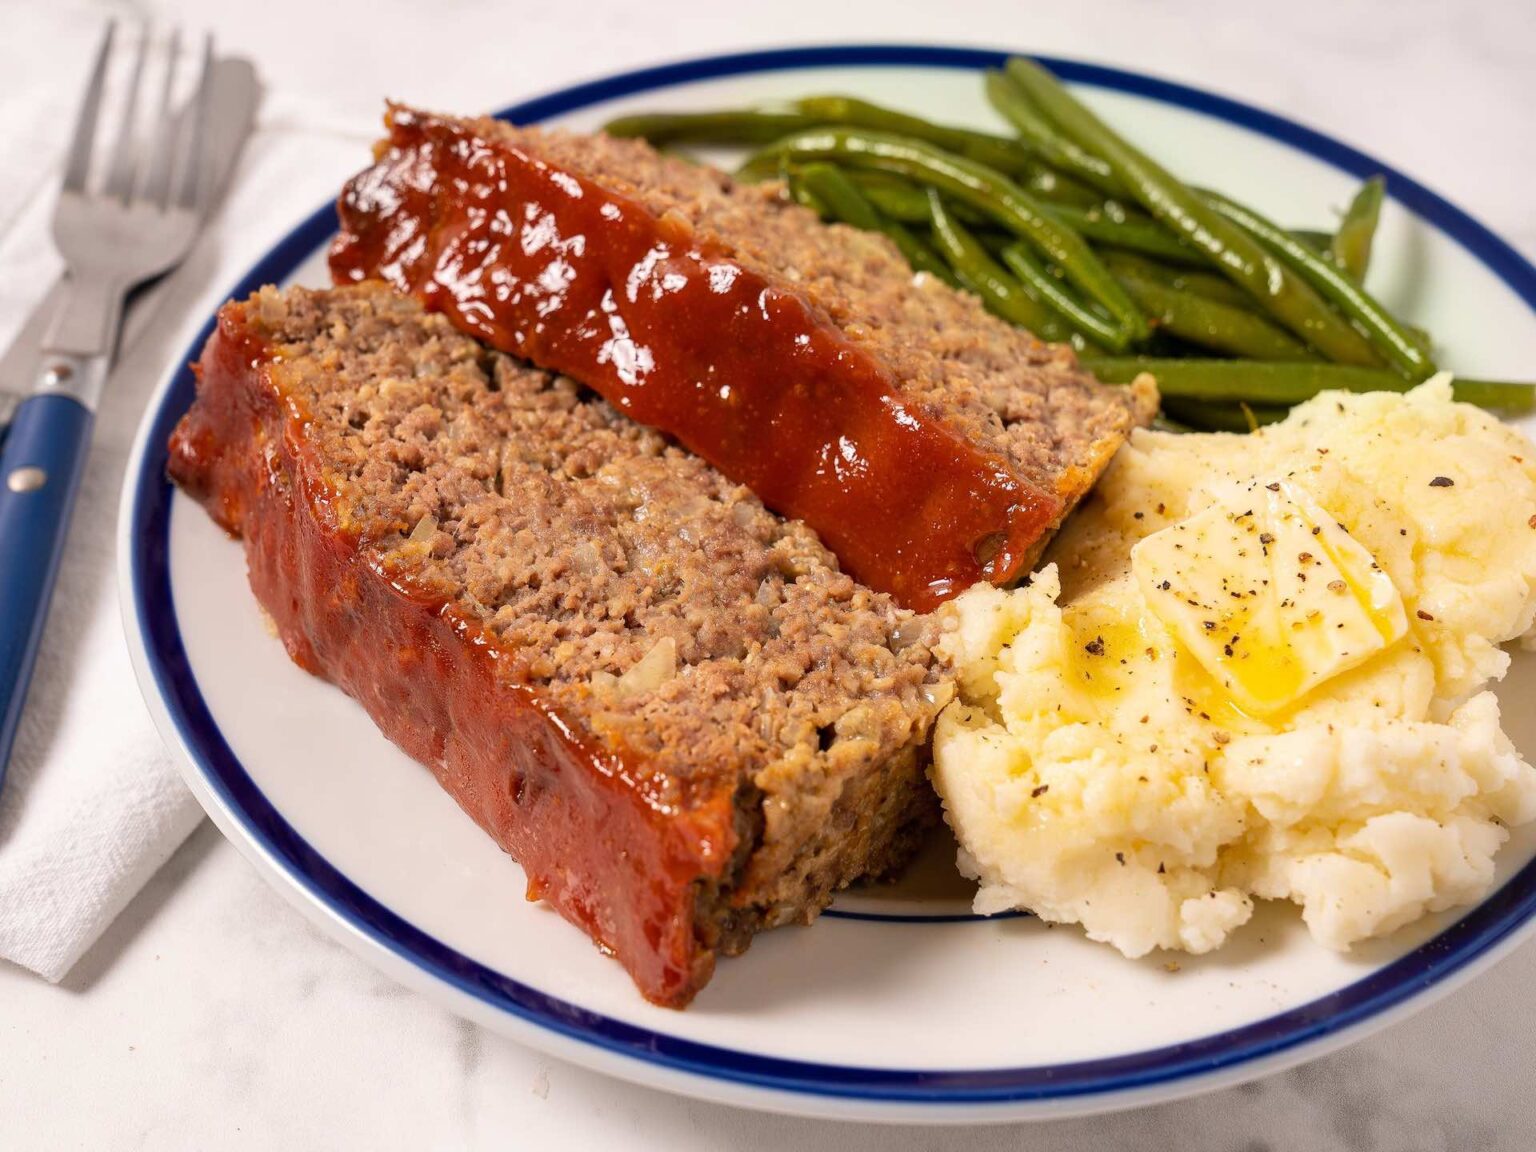 A nice, home-cooked meal is one of the best things to end your day. In the mood for meatloaf? Taste the best recipes we have to offer.